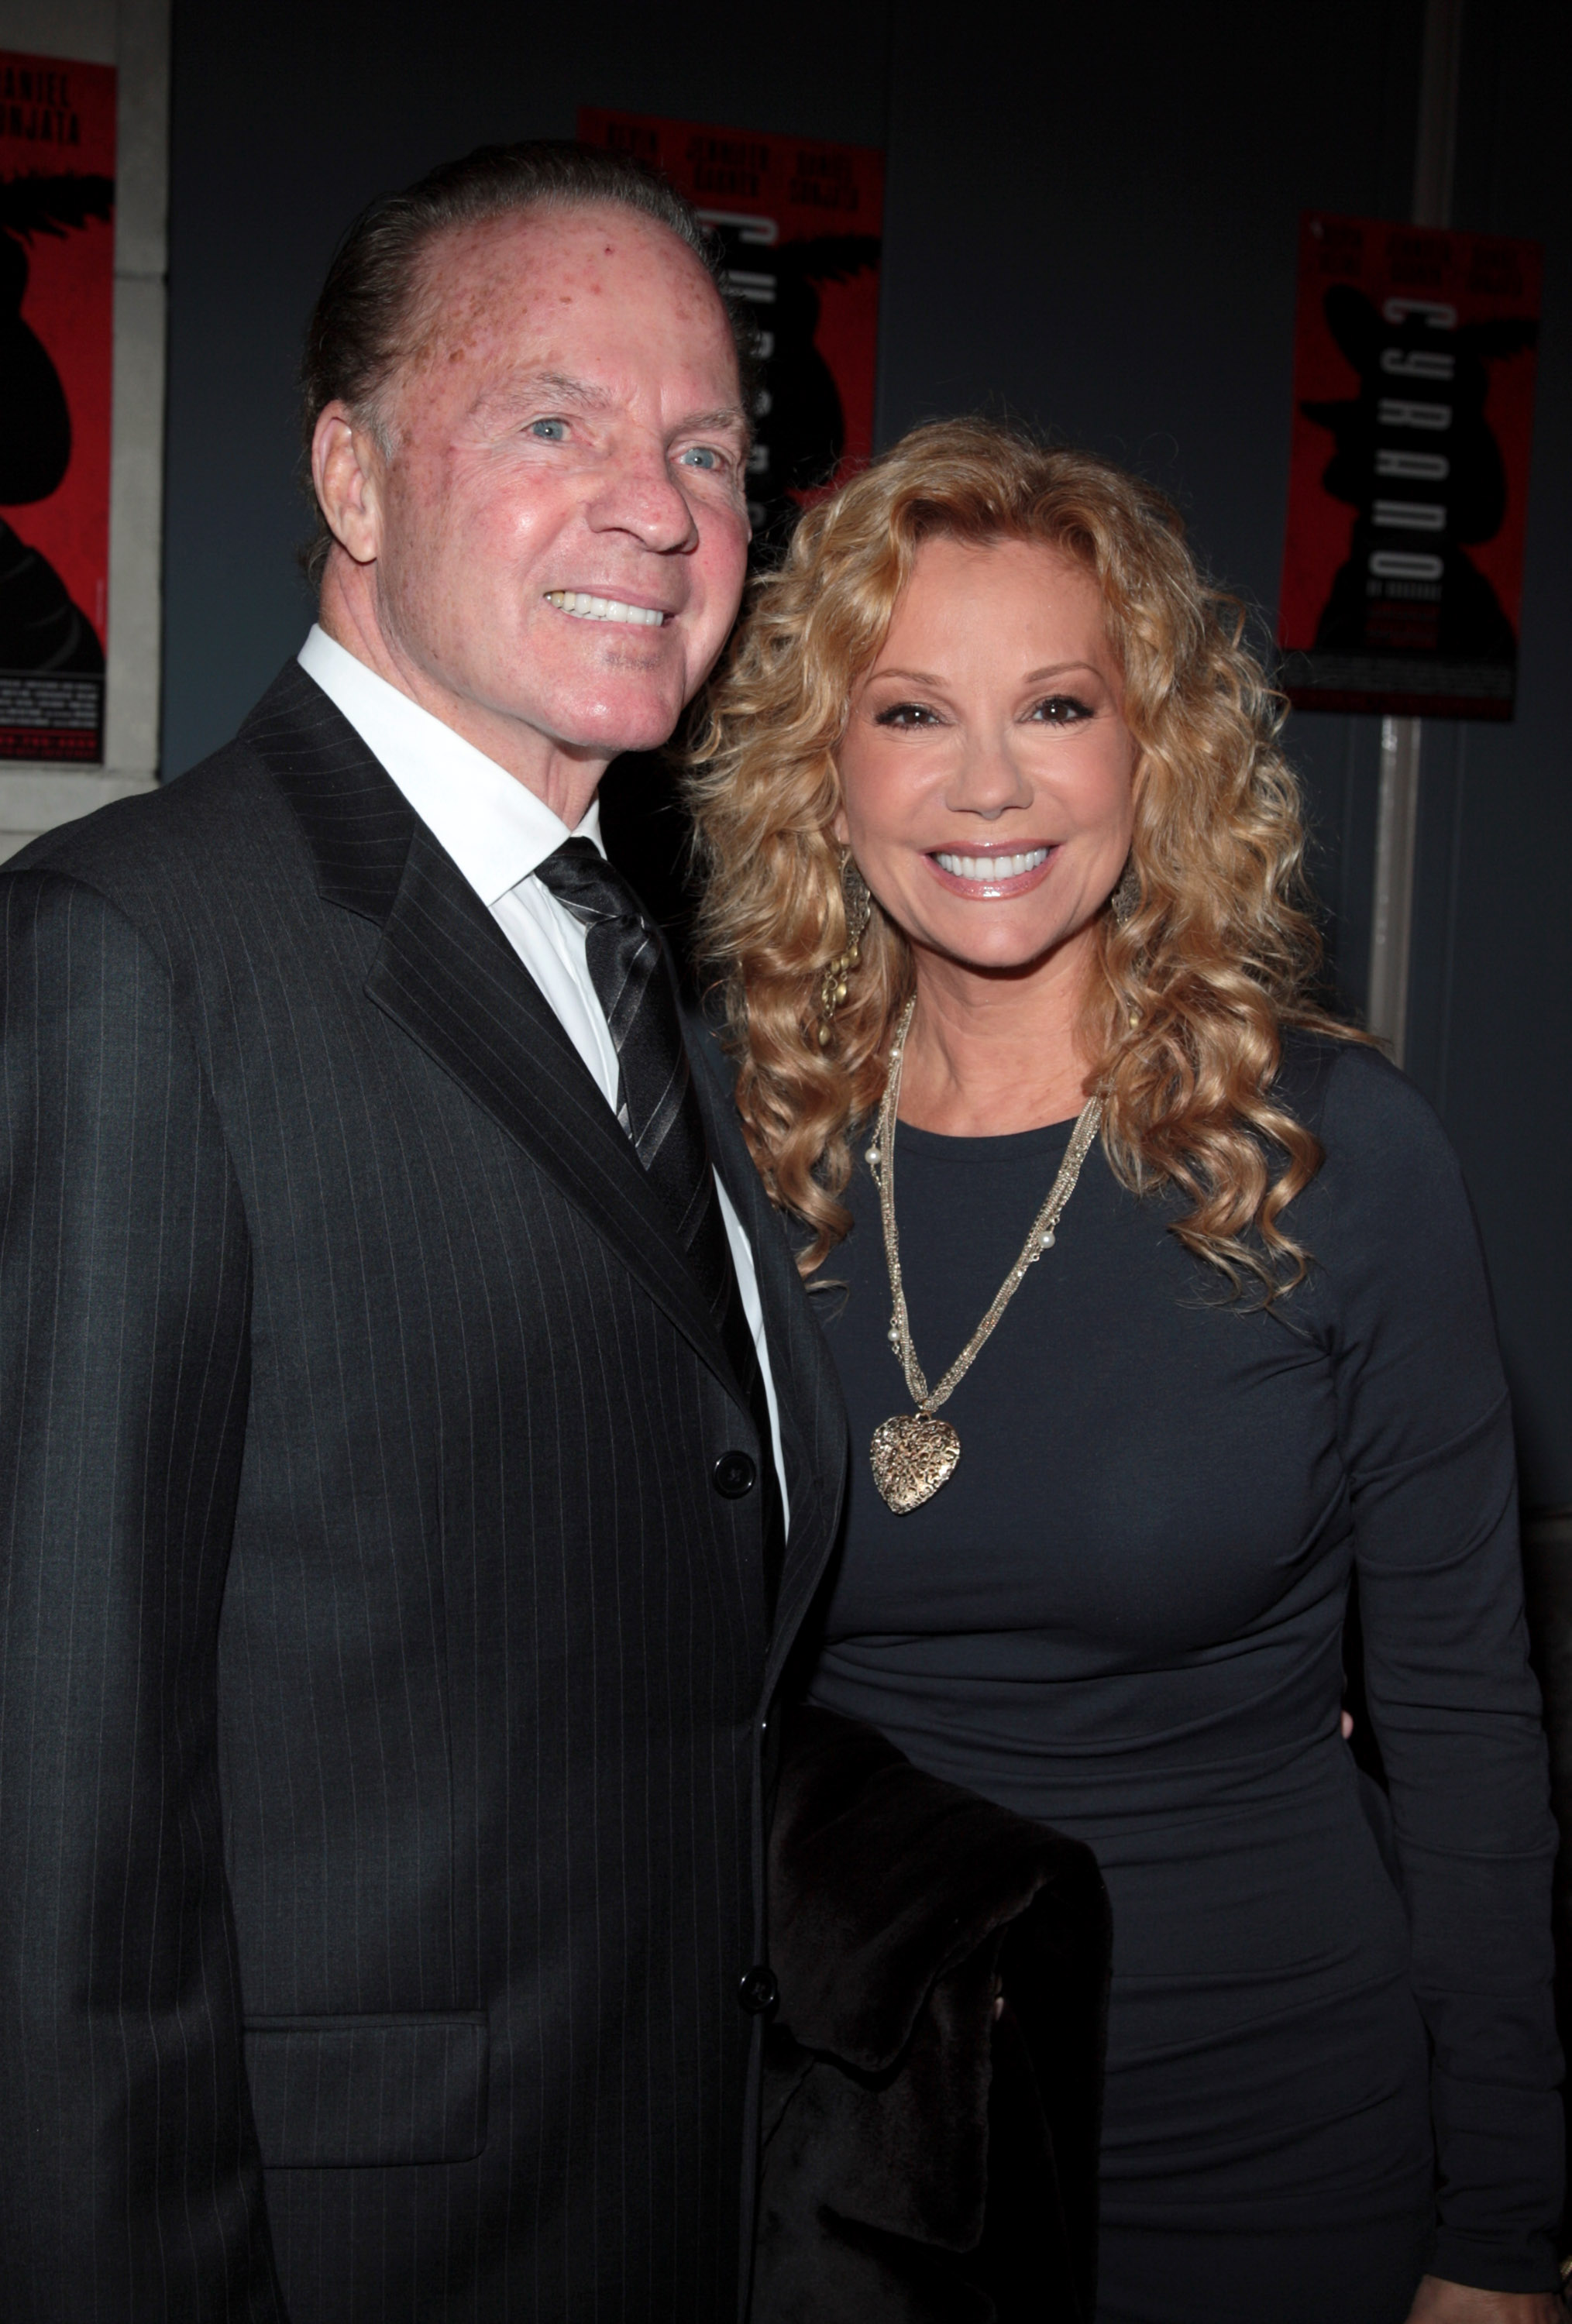 Frank Gifford and Kathie Lee Gifford in New York City on November 1, 2007 | Source: Getty Images